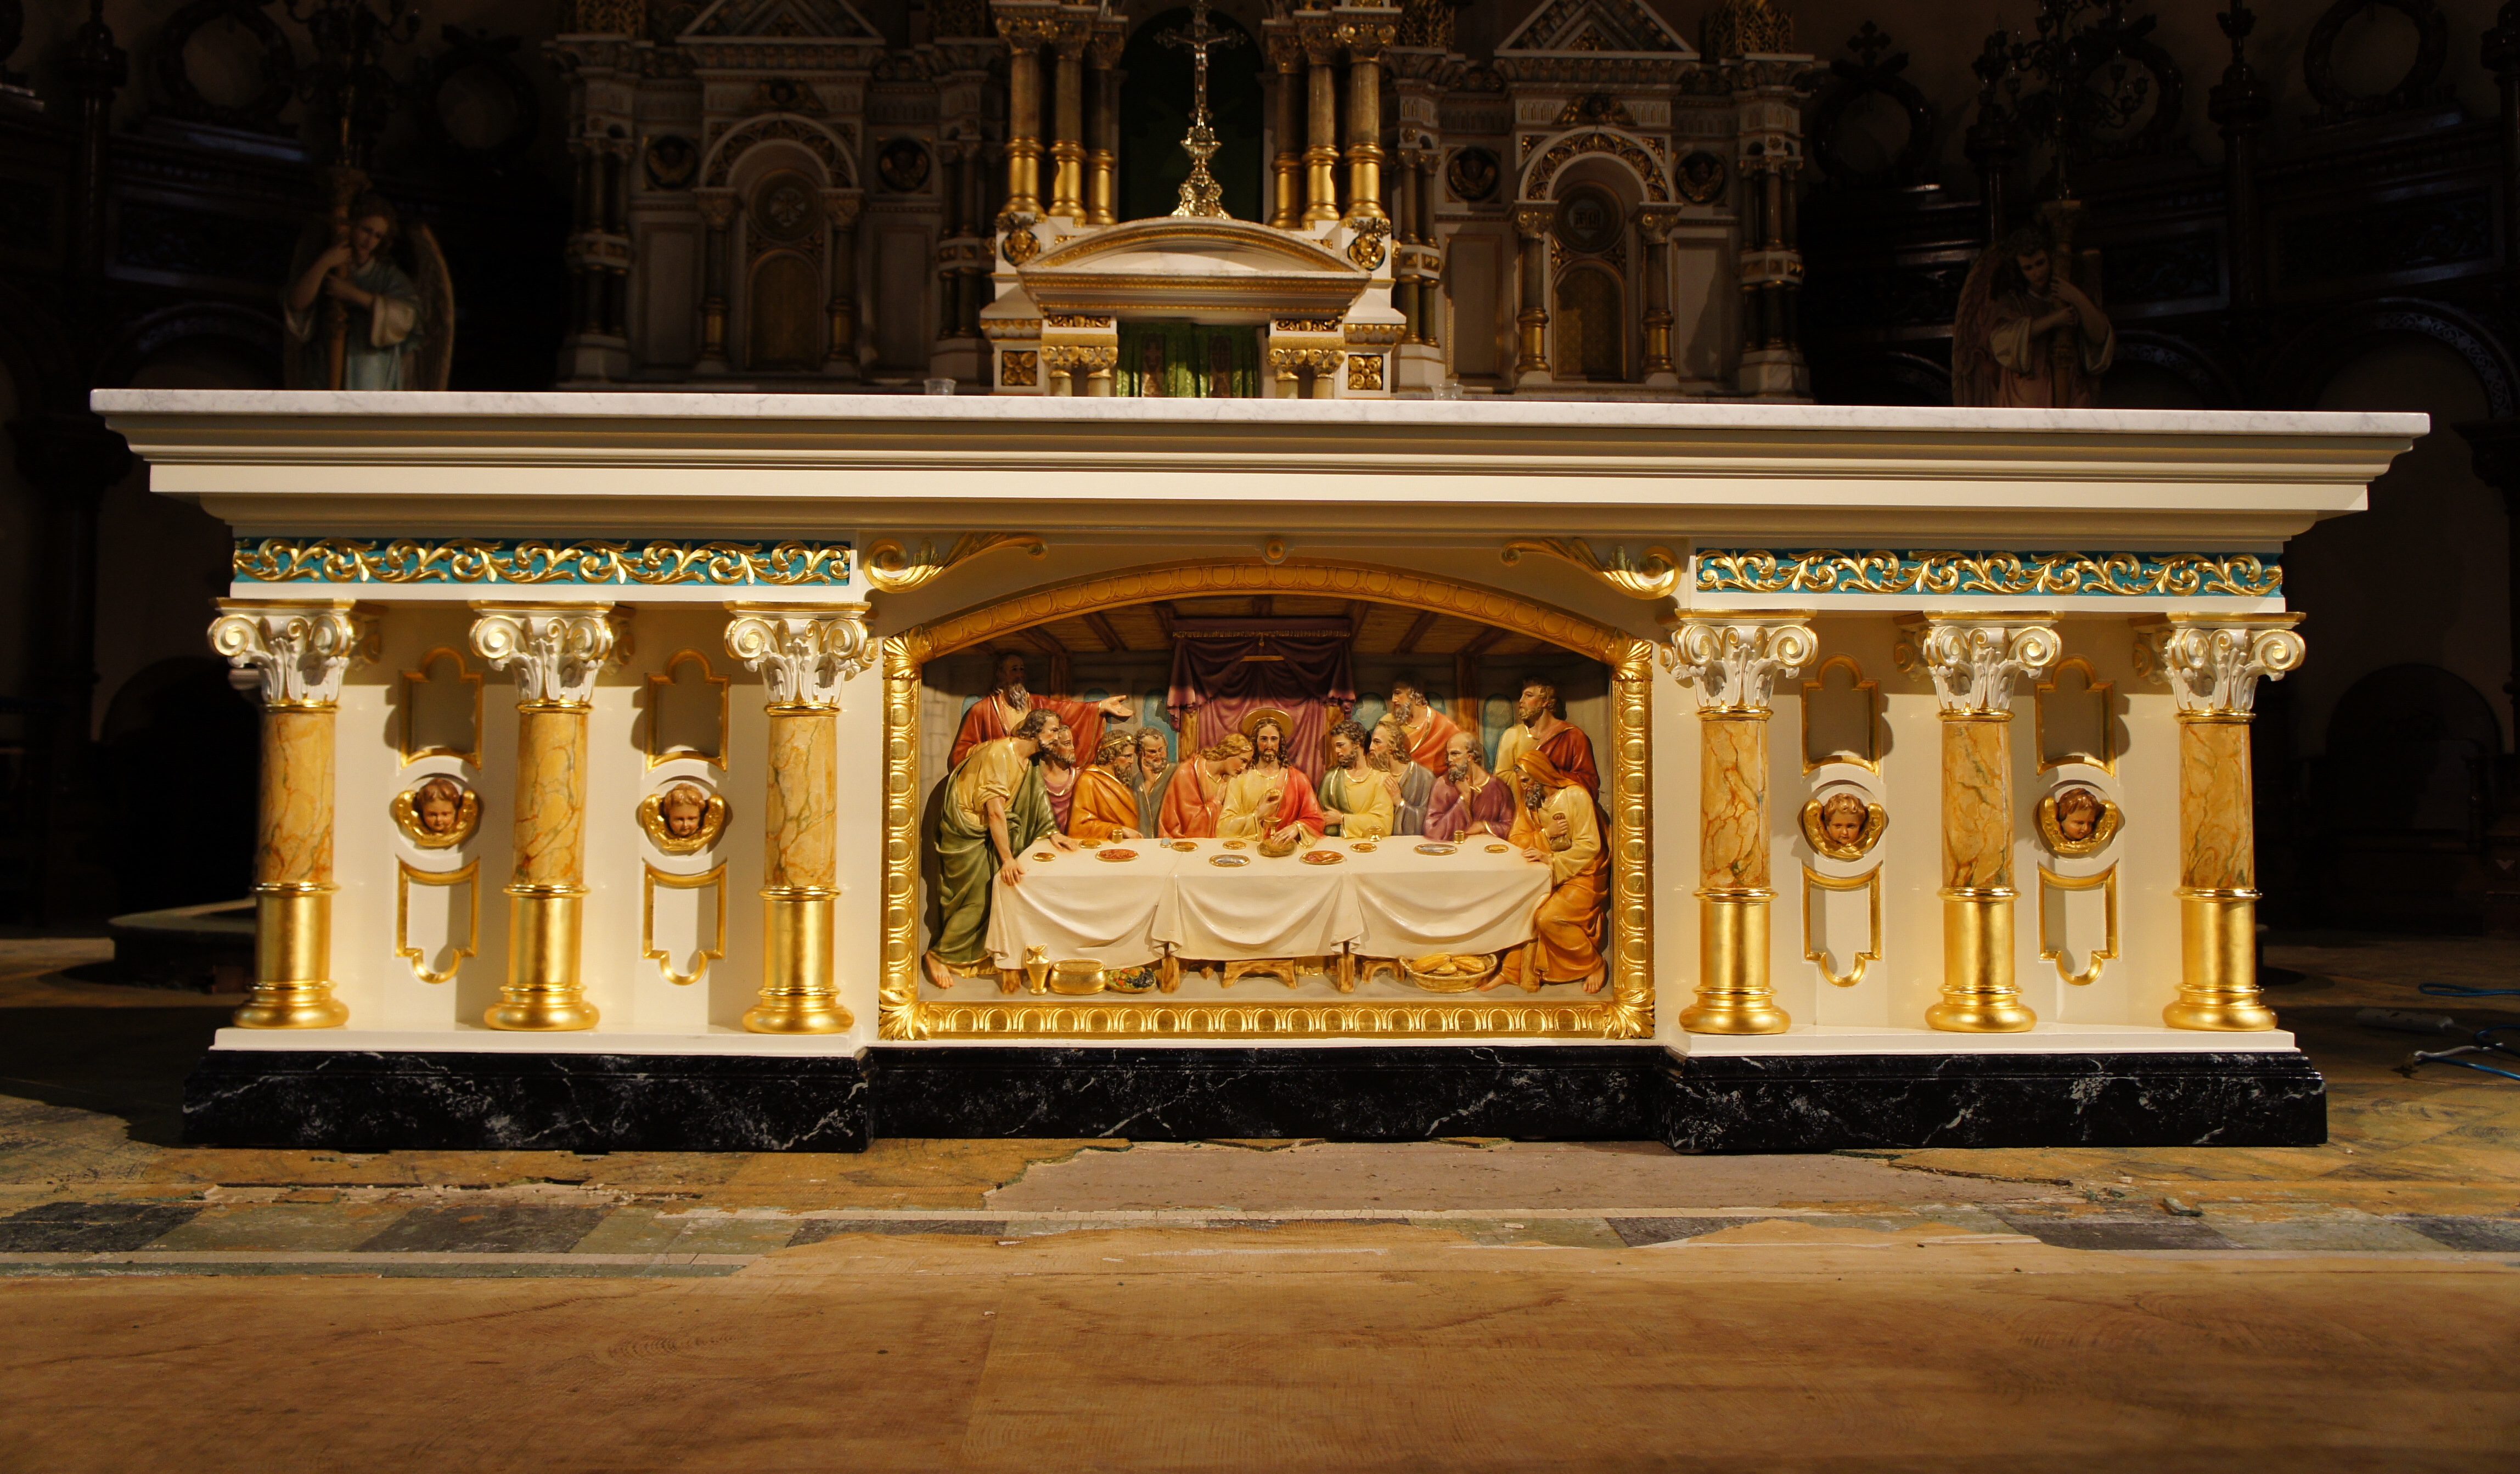 Tabernacle after gilding conservation